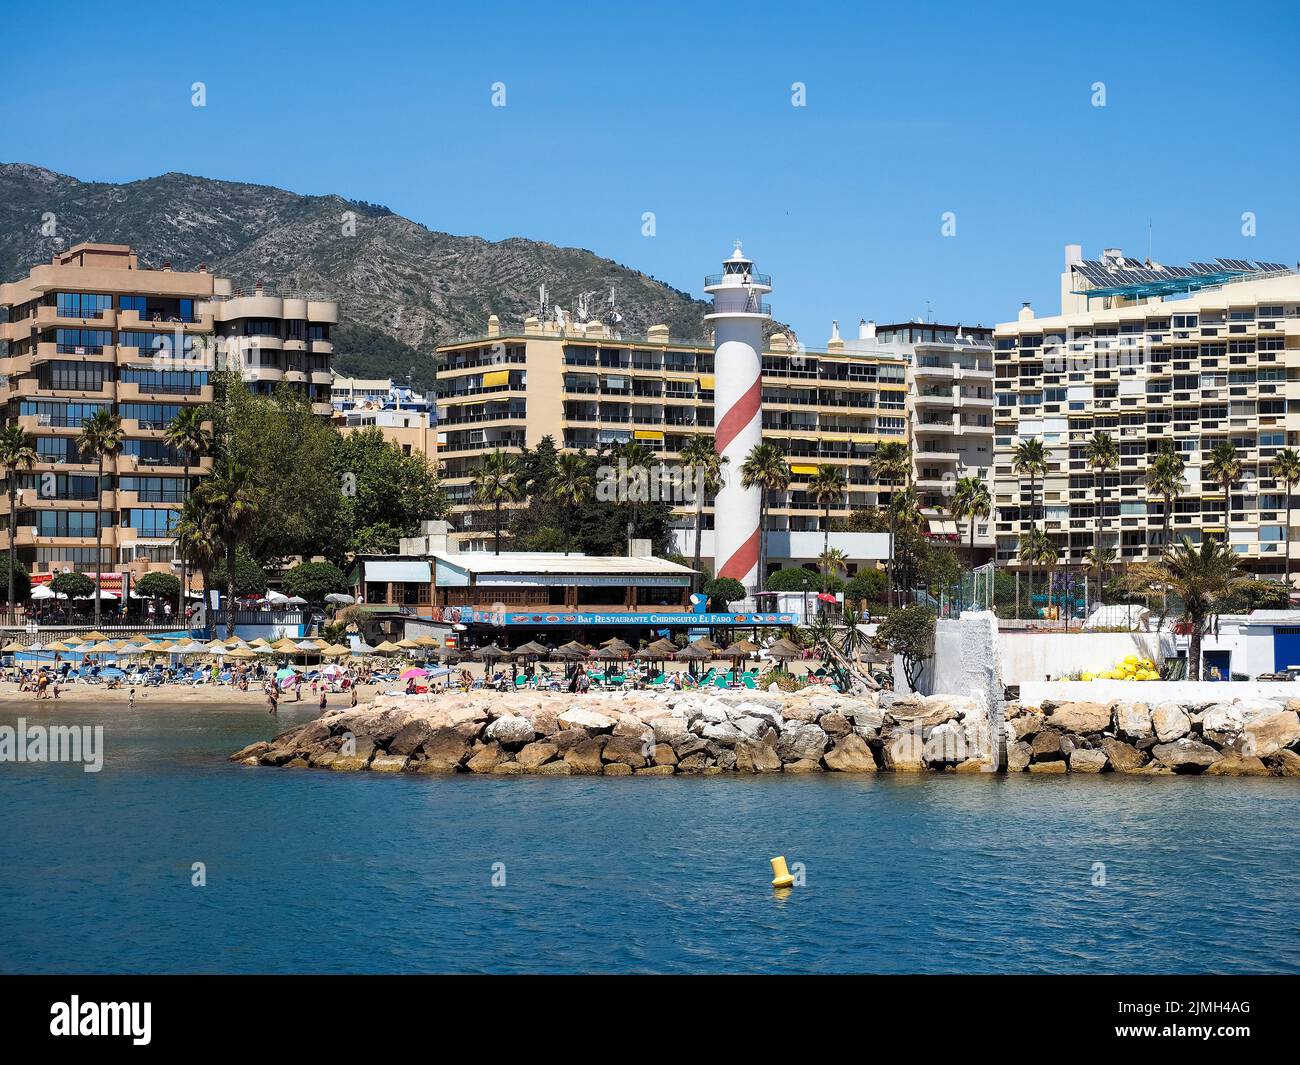 MARBELLA, ANDALUCIA/SPAIN - MAY 4 : View of the marina at Marbella Spain on May 4, 2014. Unidentified people. Stock Photo